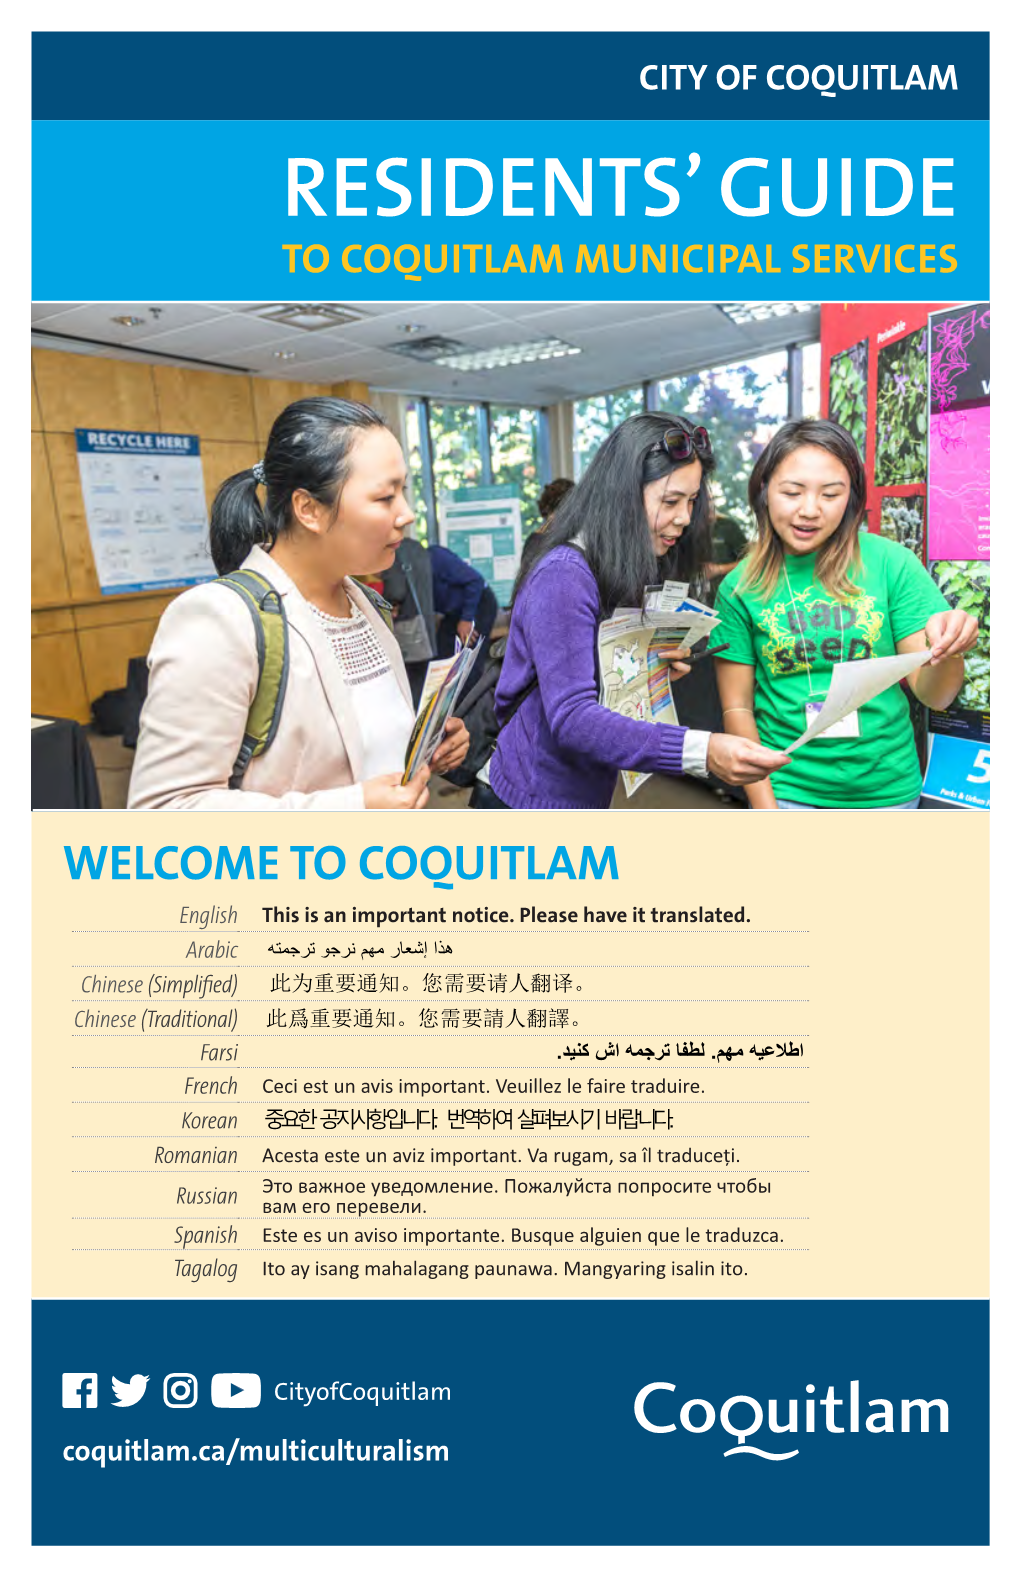 Residents' Guide to Coquitlam Municipal Services